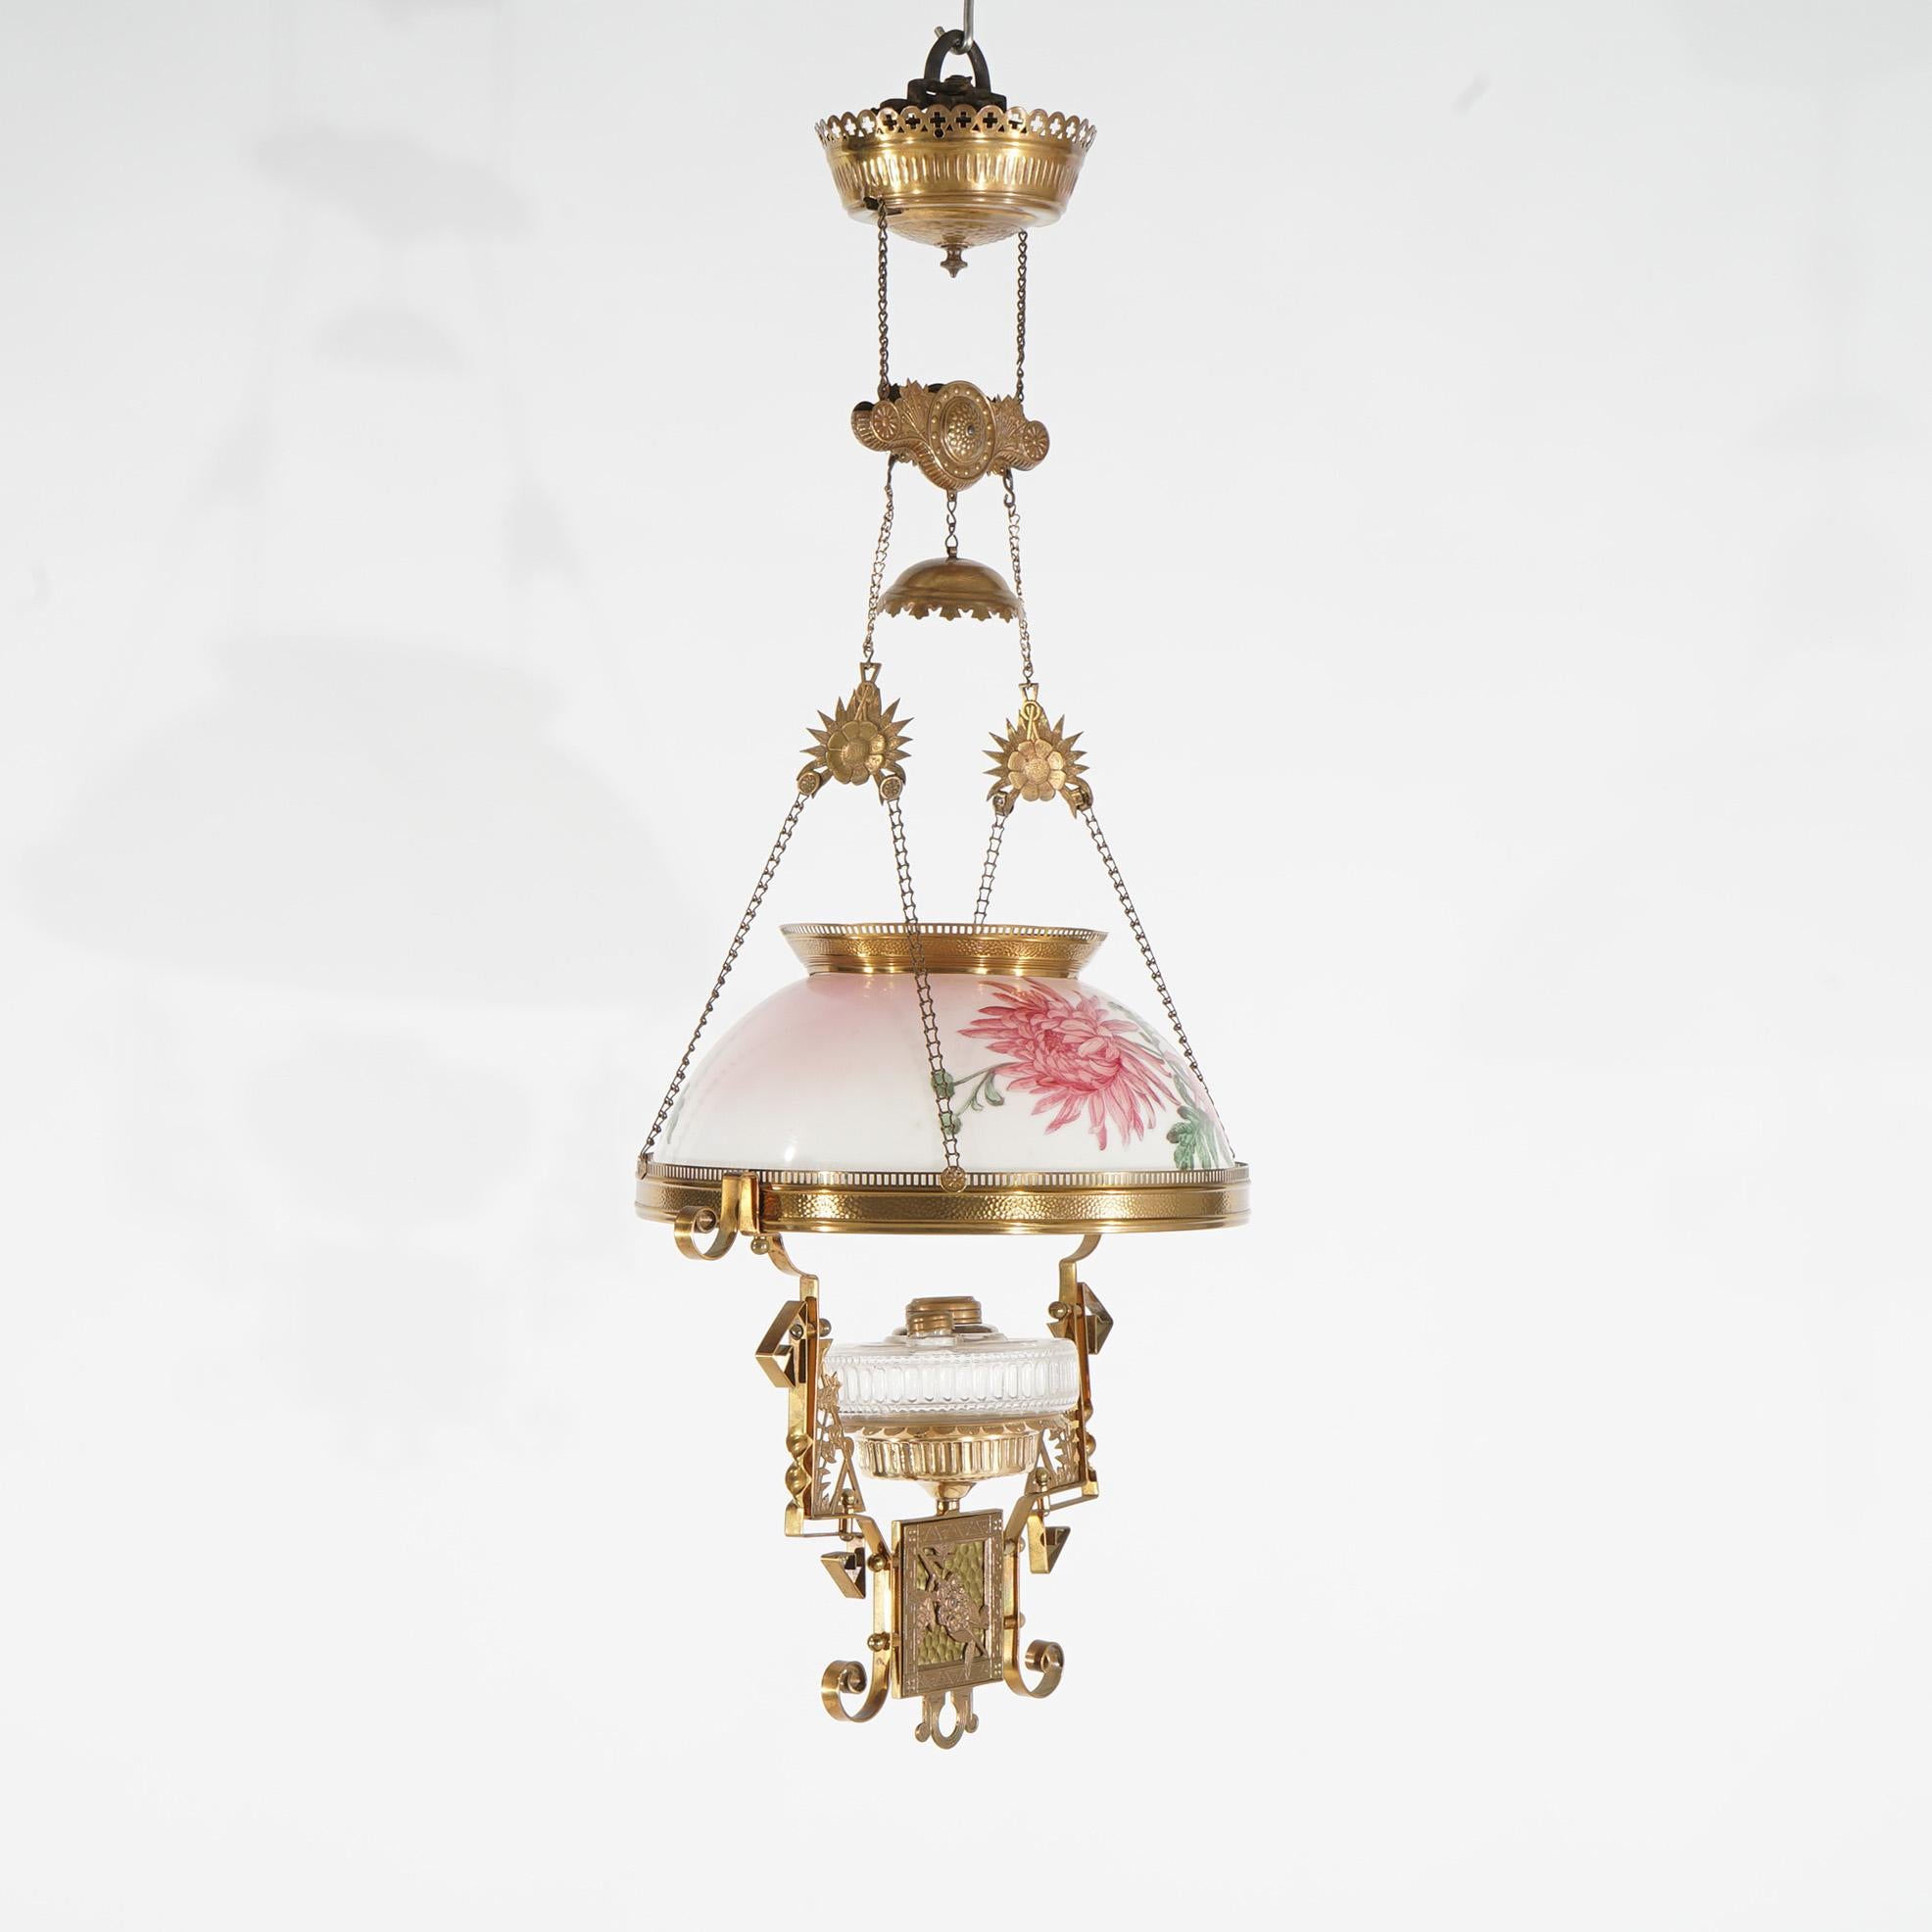 An antique Aesthetic Movement hanging kerosene lamp offers brass scroll form frame with floral hand painted glass shade & font c1890

Measure - 39